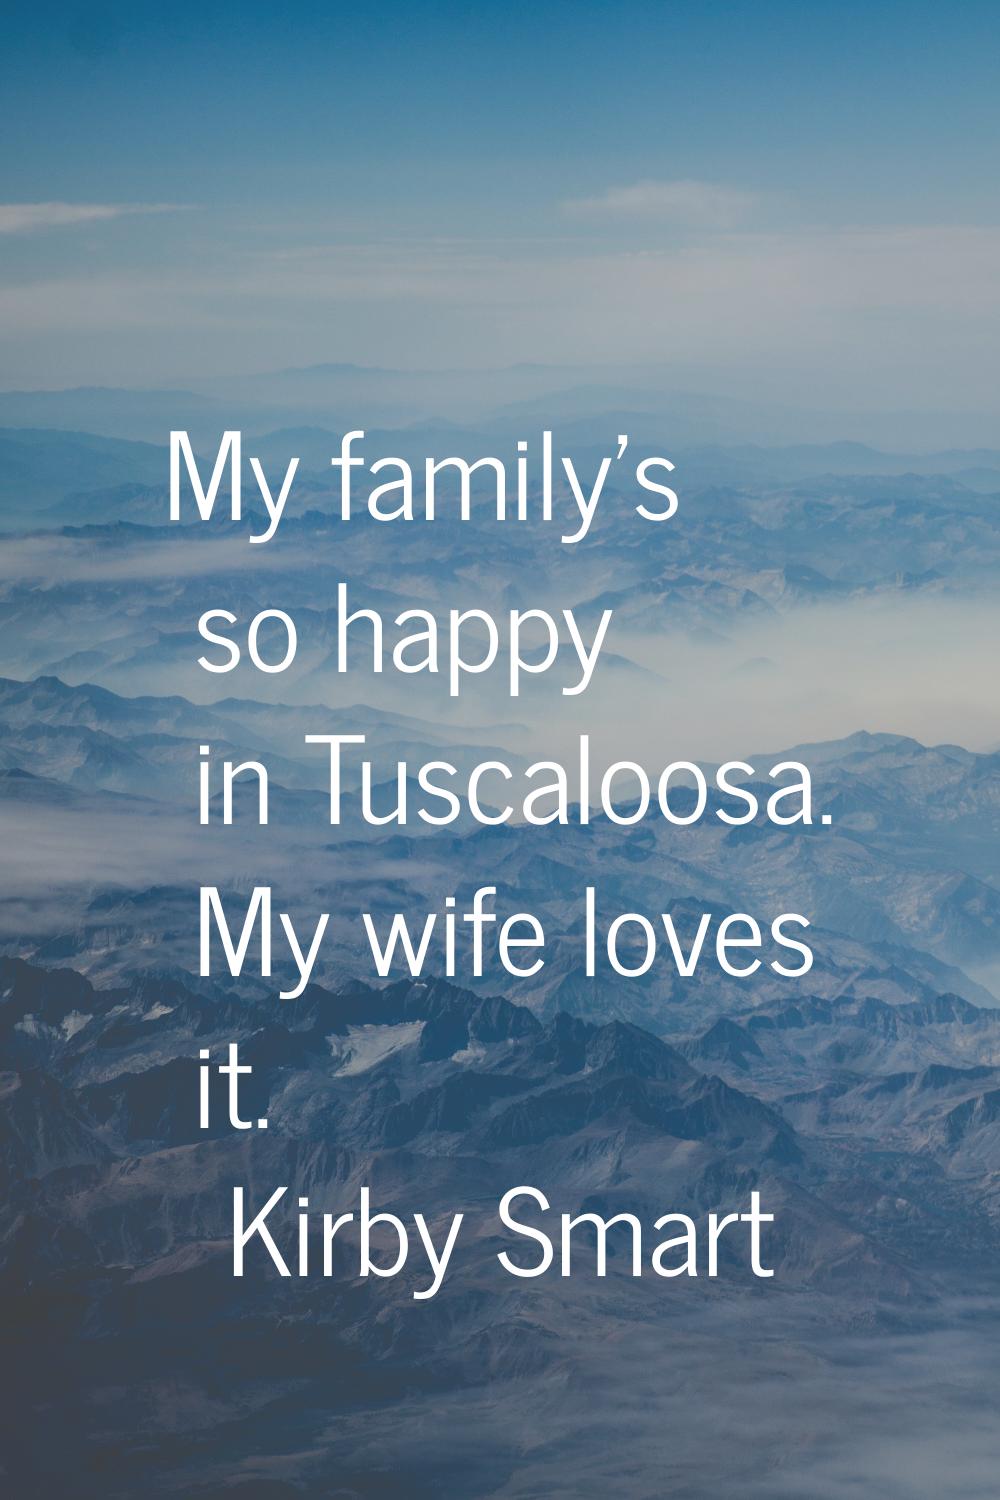 My family's so happy in Tuscaloosa. My wife loves it.